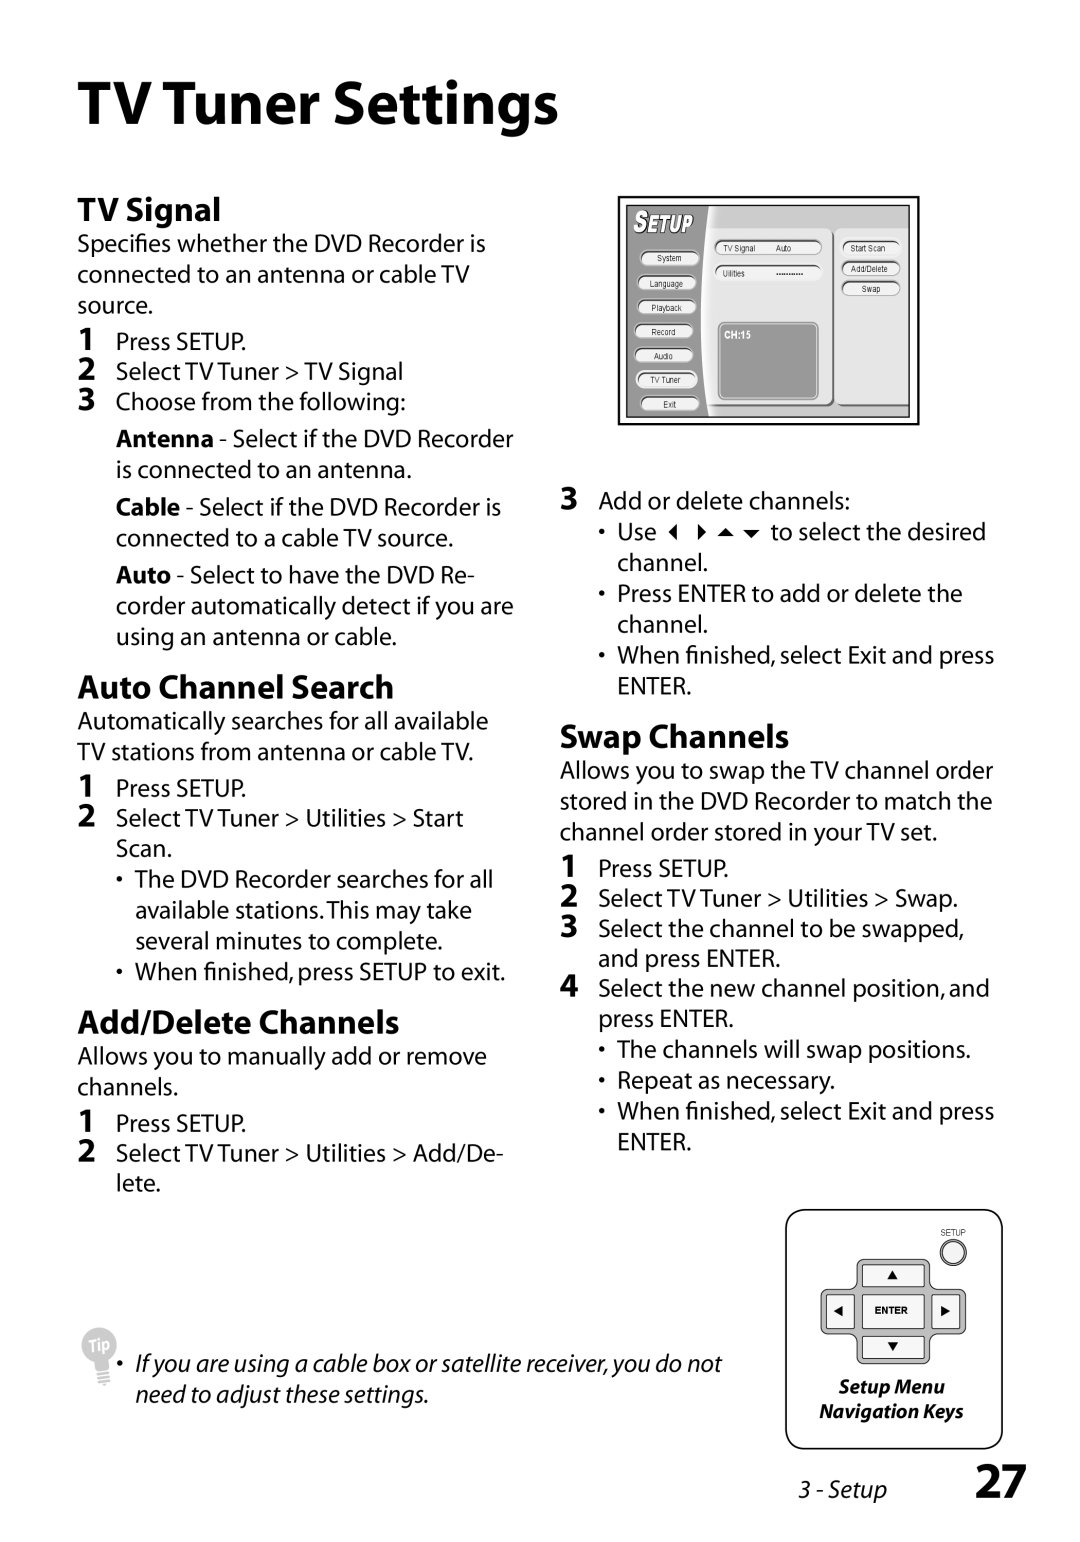 GoVideo R6750 manual TV Tuner Settings, TV Signal, Auto Channel Search, Add/Delete Channels, Swap Channels, Setup 